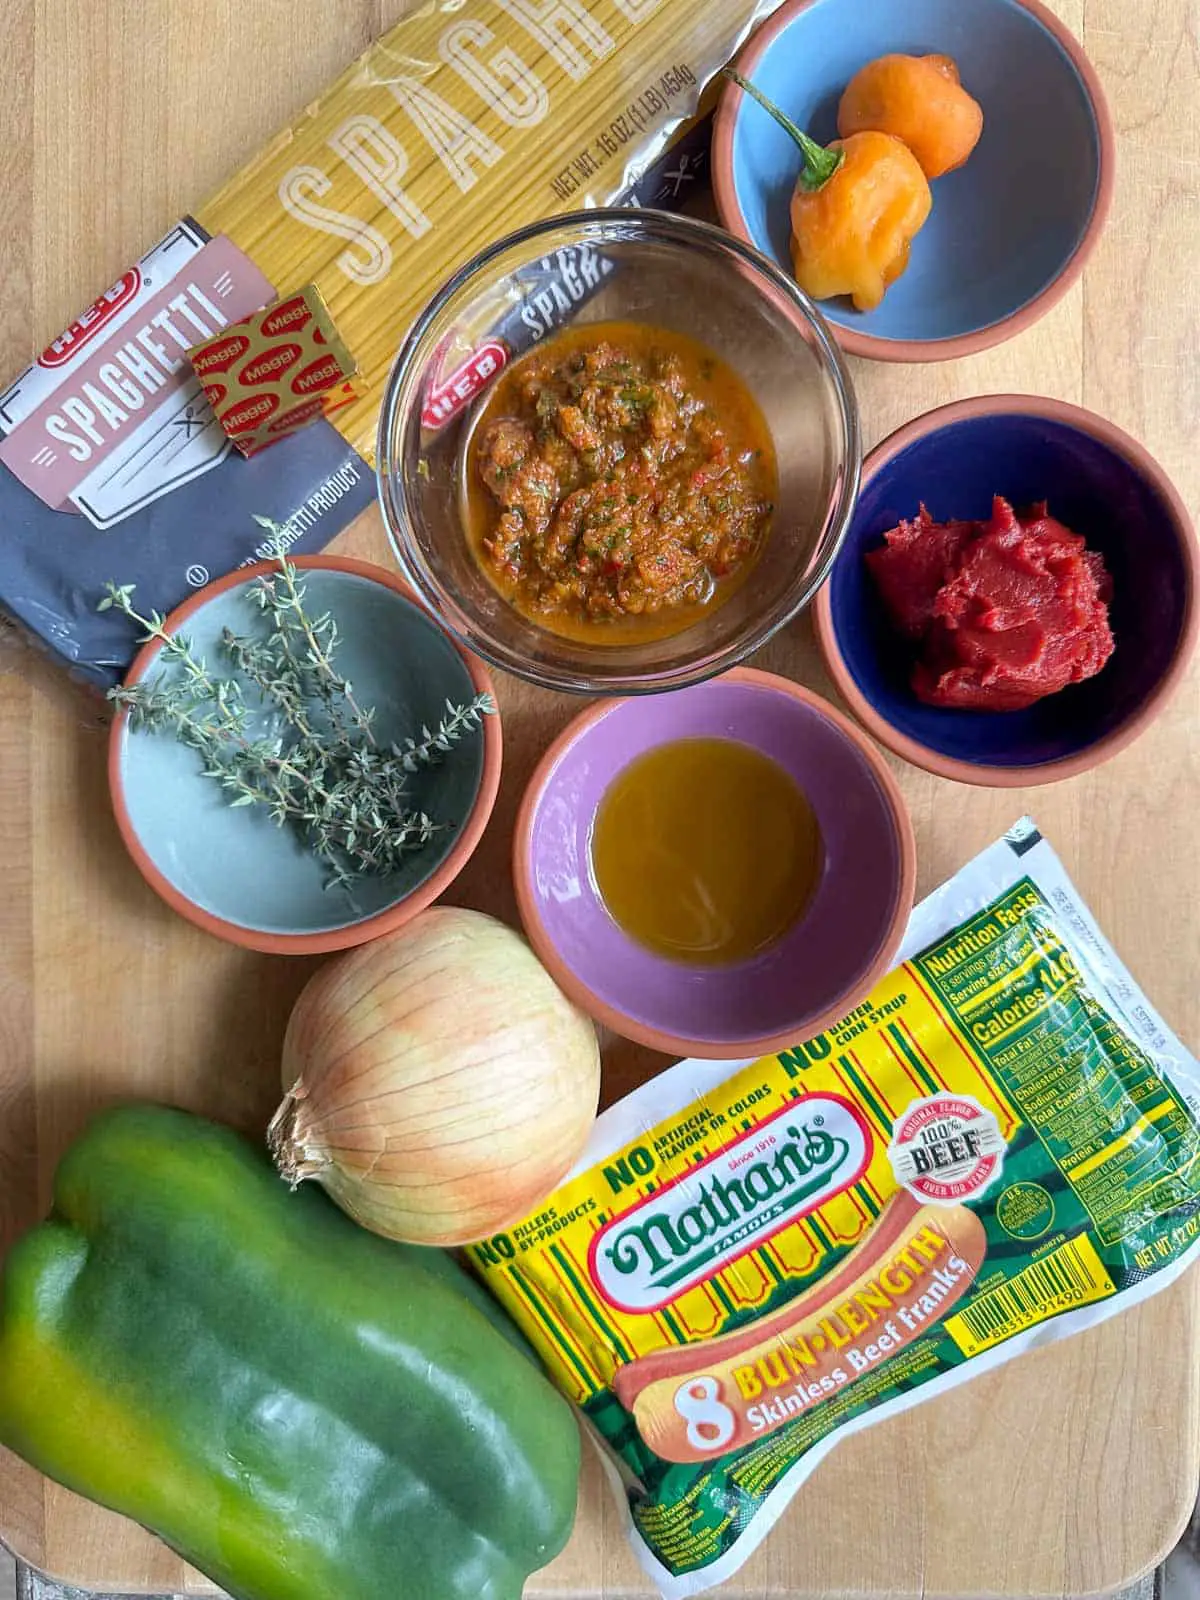 A package of spaghetti, Maggi chicken bouillon tablet, green bell pepper, onion, package of Nathan's hot dogs, and bowls containing Scotch bonnet chilis, Haitian epis, thyme, olive oil, and tomato paste.